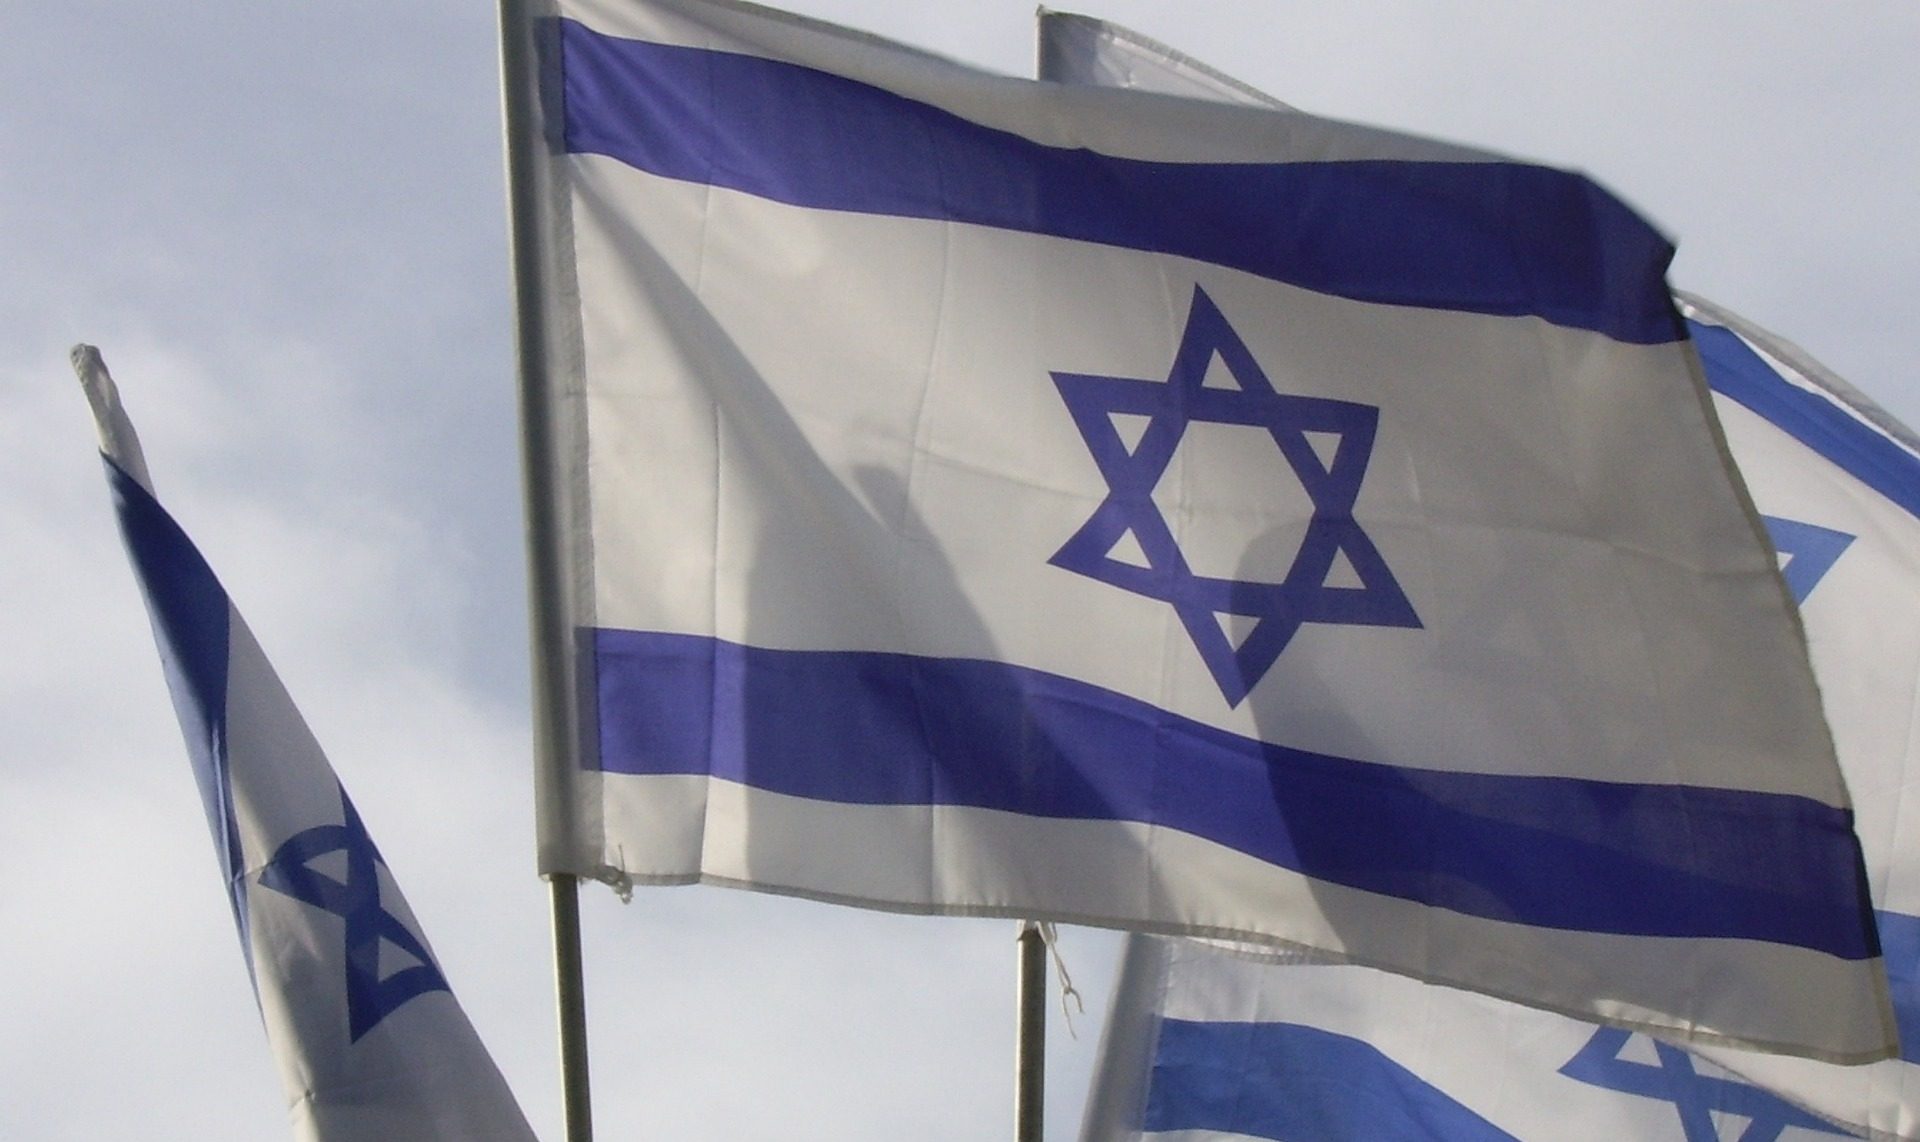 Israel to impose new AML rules on digital currencies